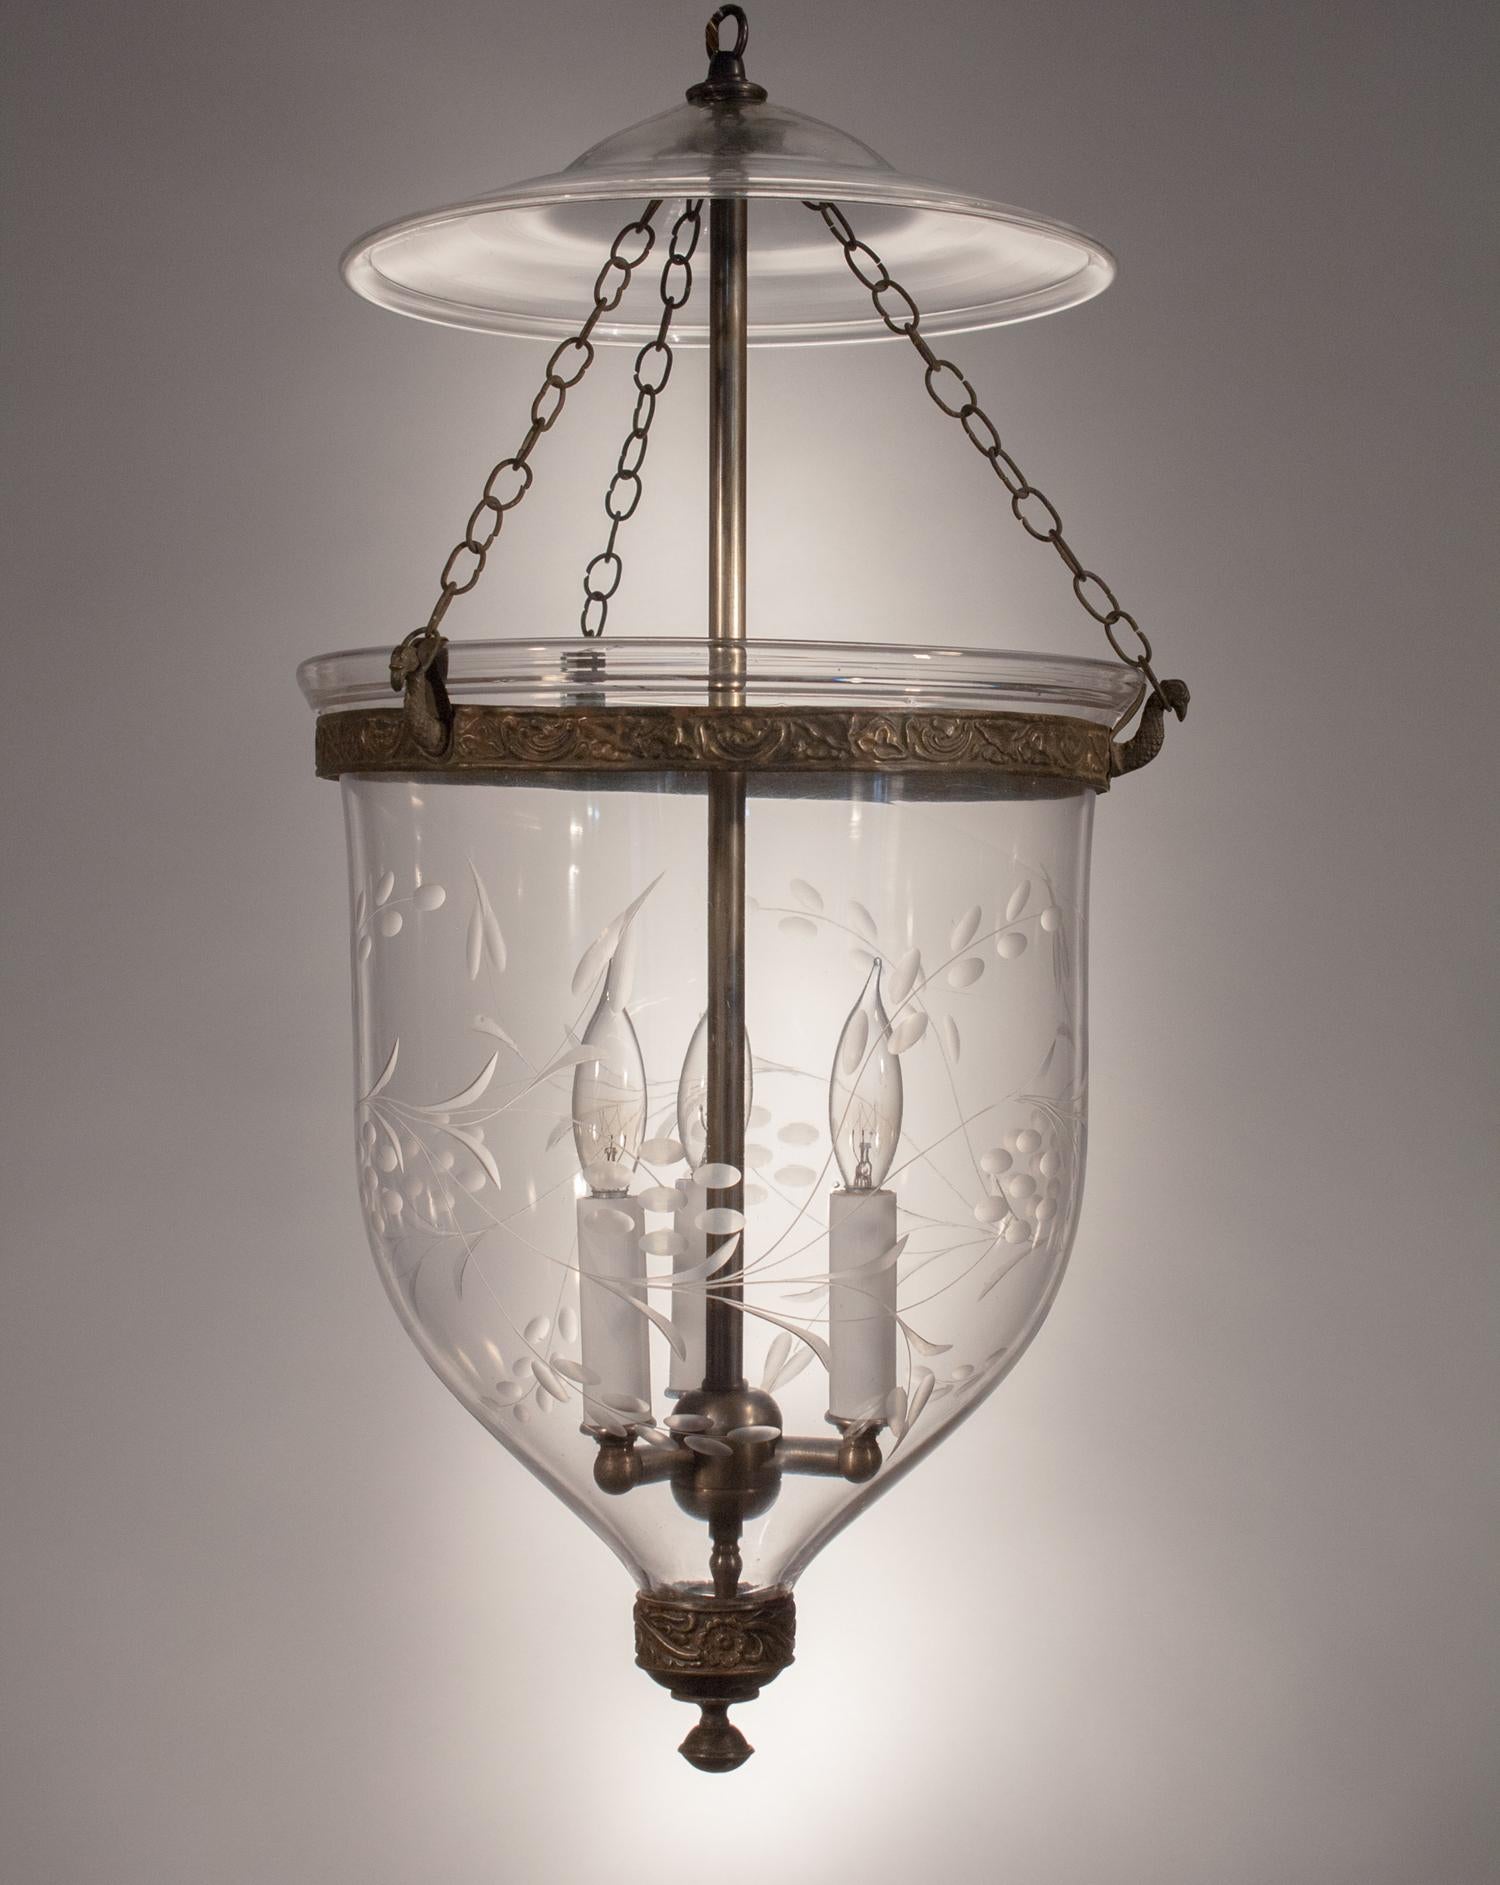 This hand blown glass bell jar lantern features its original smoke bell, brass candleholder base, band, and chains. It has a truly beautiful form that is complemented by a graceful, etched vine motif. The lantern has been newly electrified with a